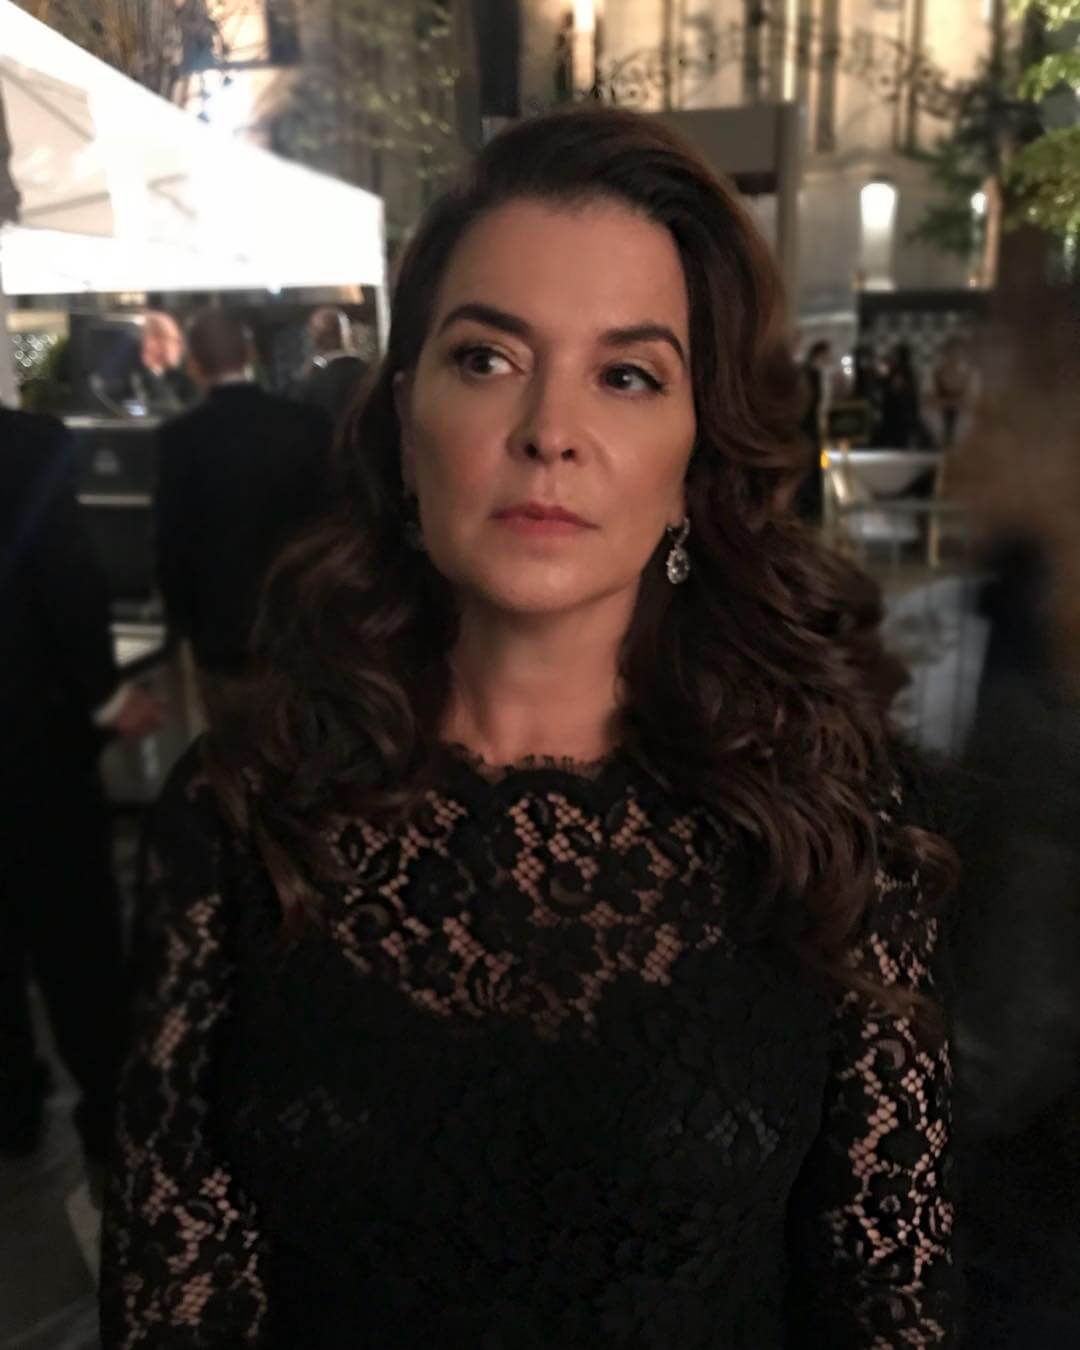 60+ Hot Pictures Of Annabella Sciorra Are So Damn Sexy That We Don’t Deserve Her | Best Of Comic Books